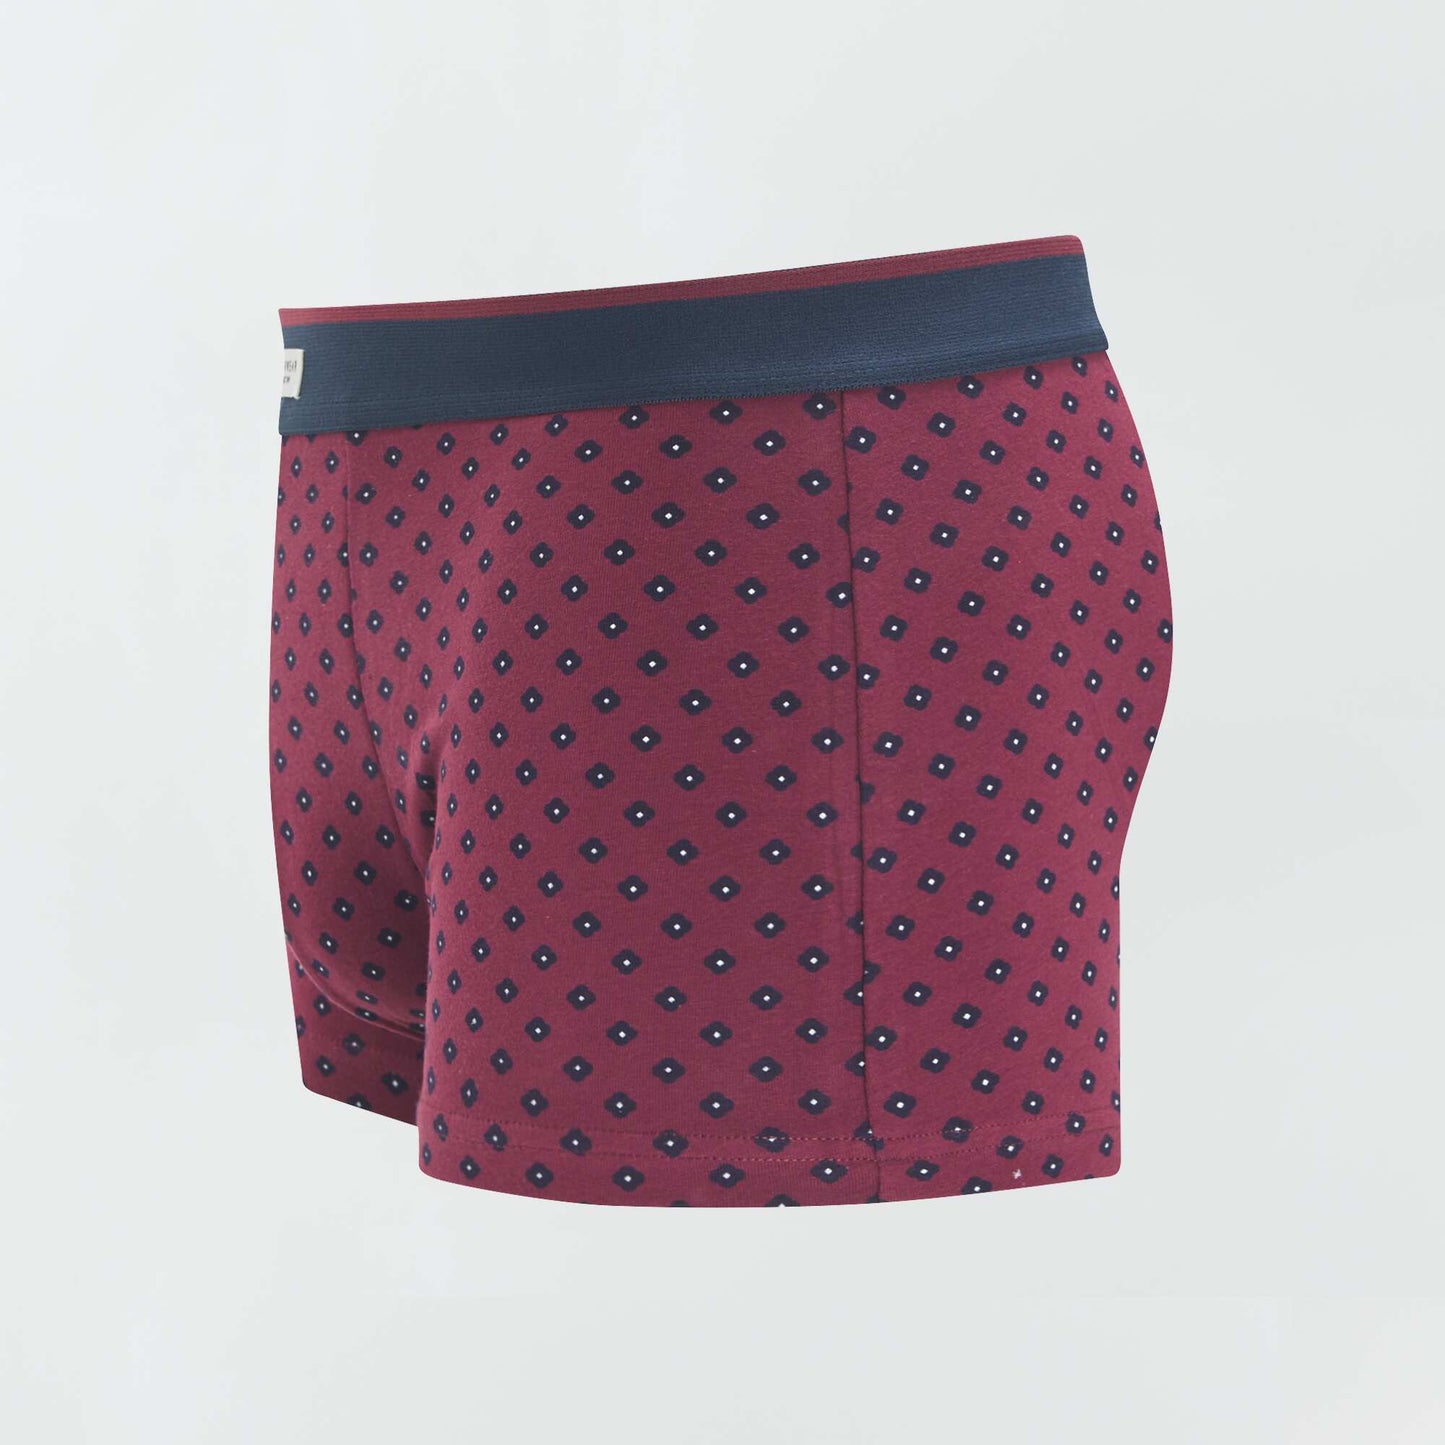 Pack of 3 pairs of stretch boxer shorts BURGUNDY